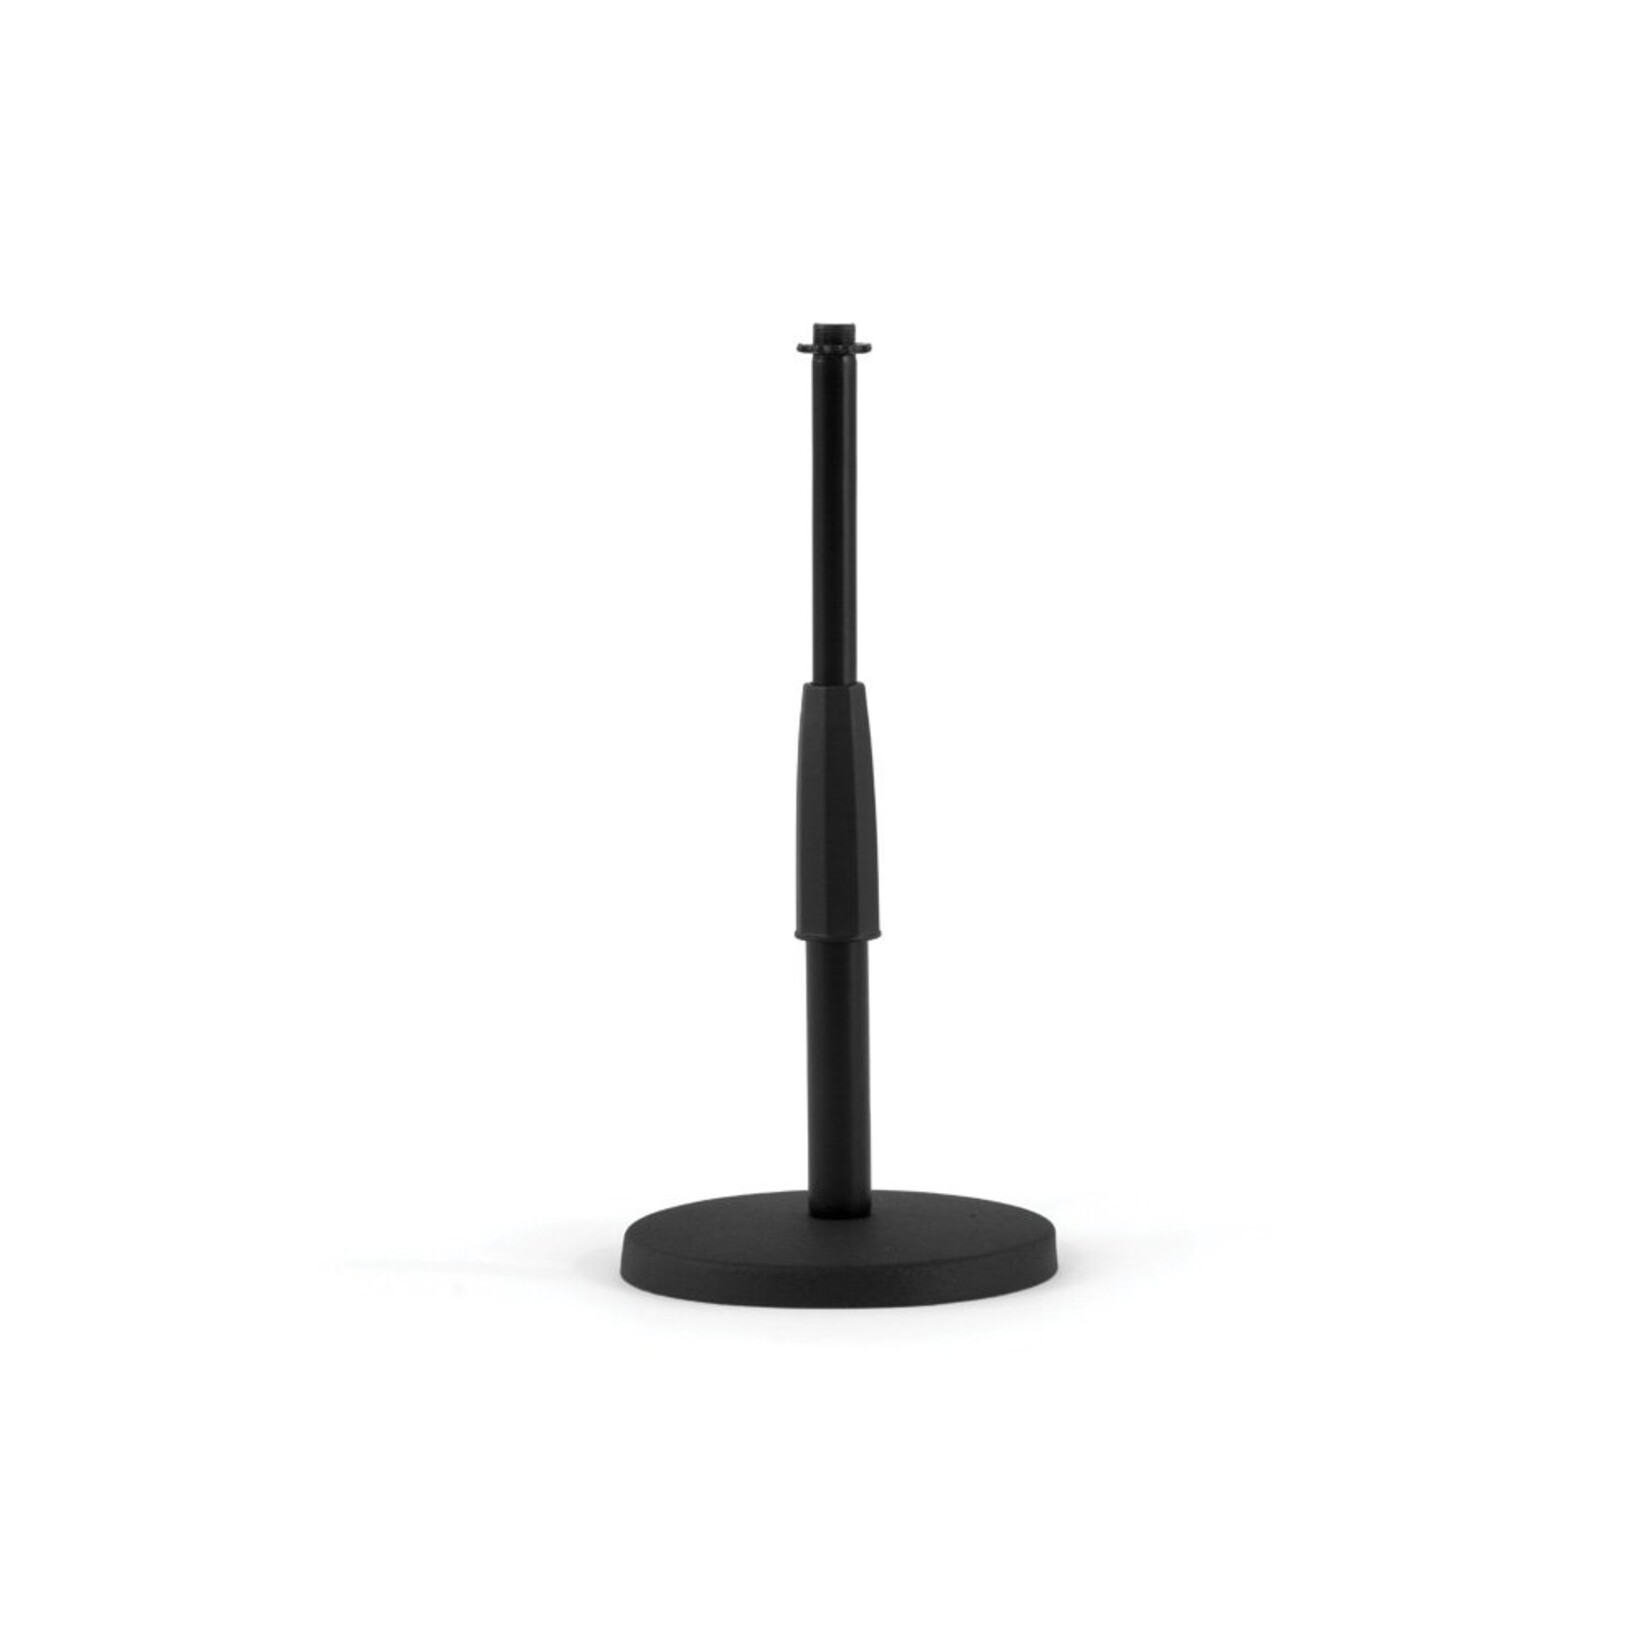 Nomad NMS-6105 Desktop Microphone Stand-Black